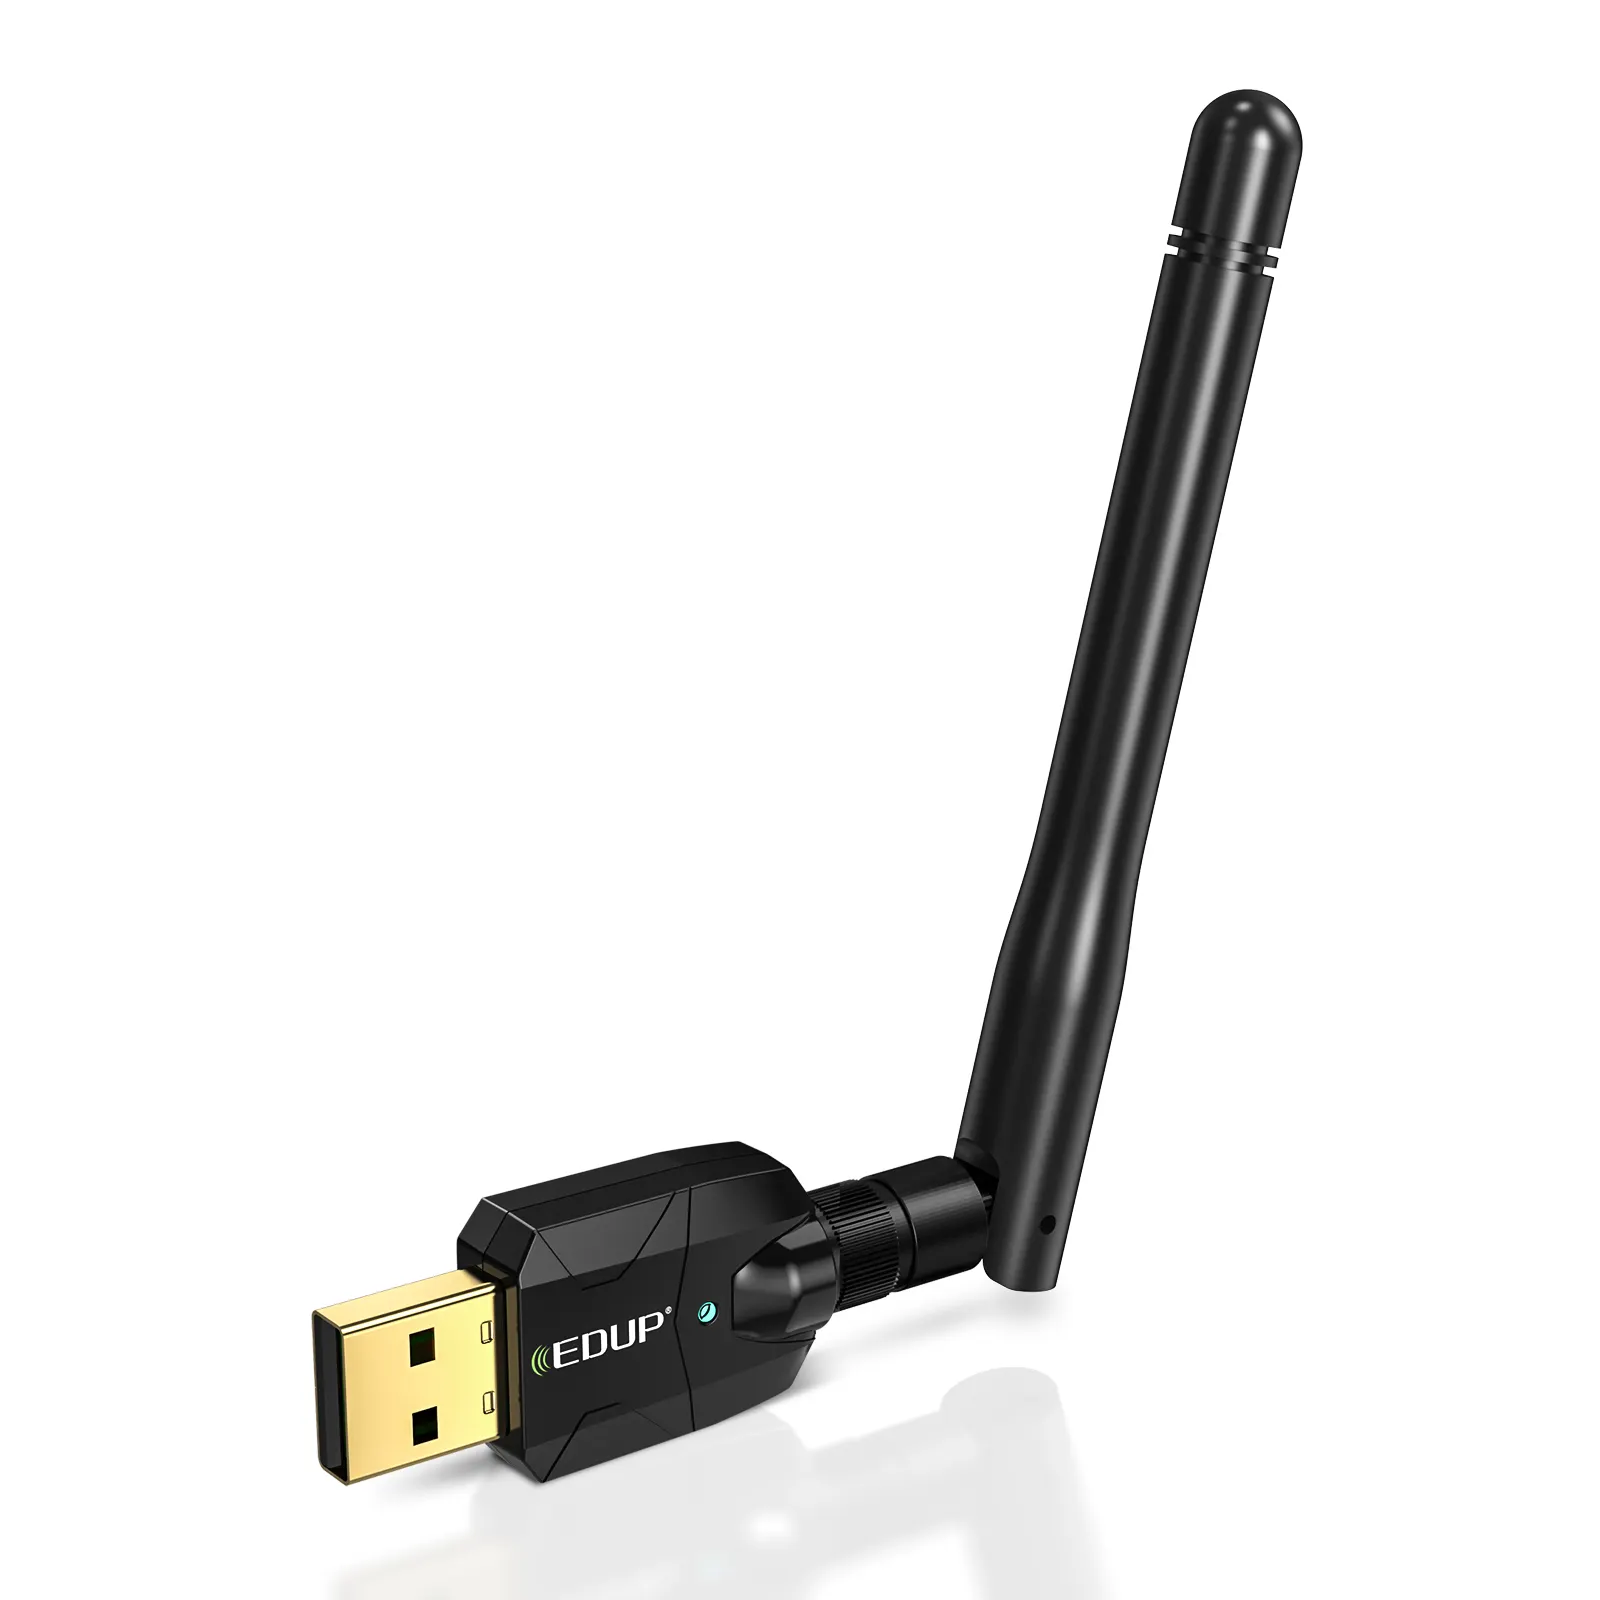 2022 New Arrival Long Range USB Bluetooth 5.1 Adapter With External Antenna Bluetooth Dongle for PC